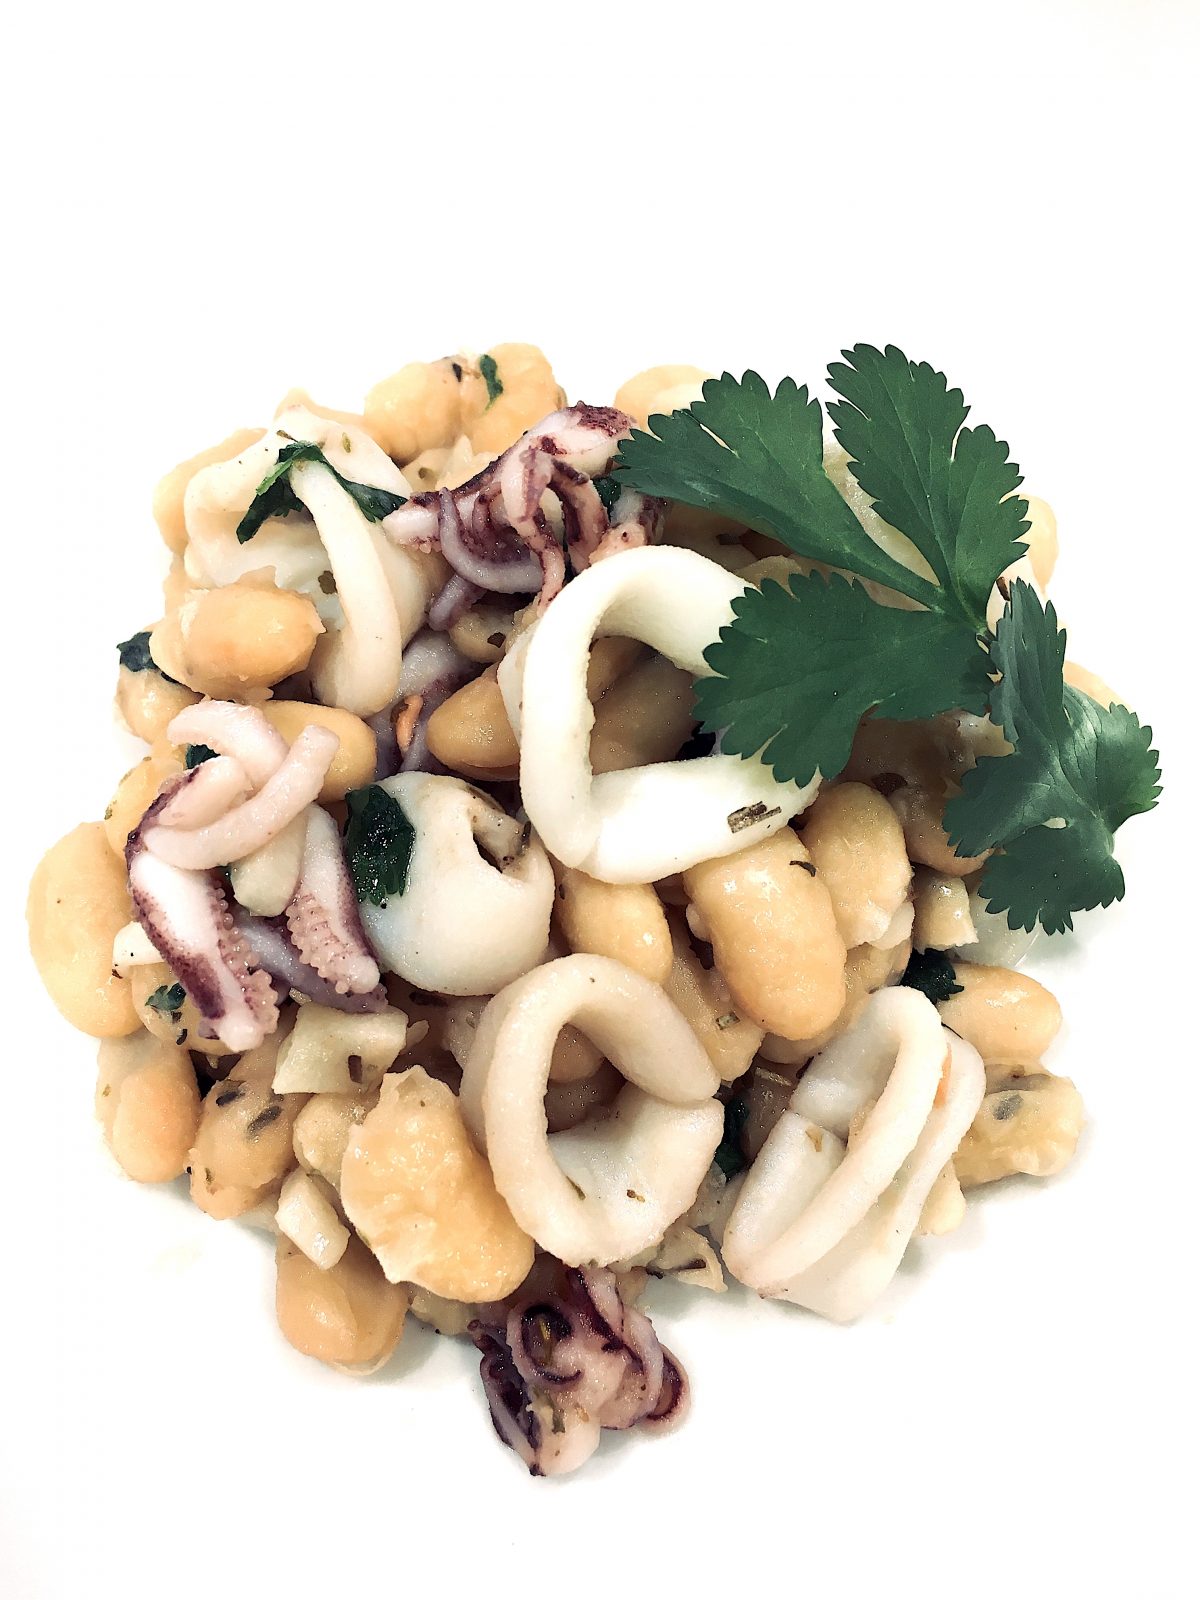 A Quick and Easy Spanish Seafood Dish - Calamari and White Beans #CannelliniBeansCalamari #spanishseafood #spanishquickeasy #calamariCannellinibeans